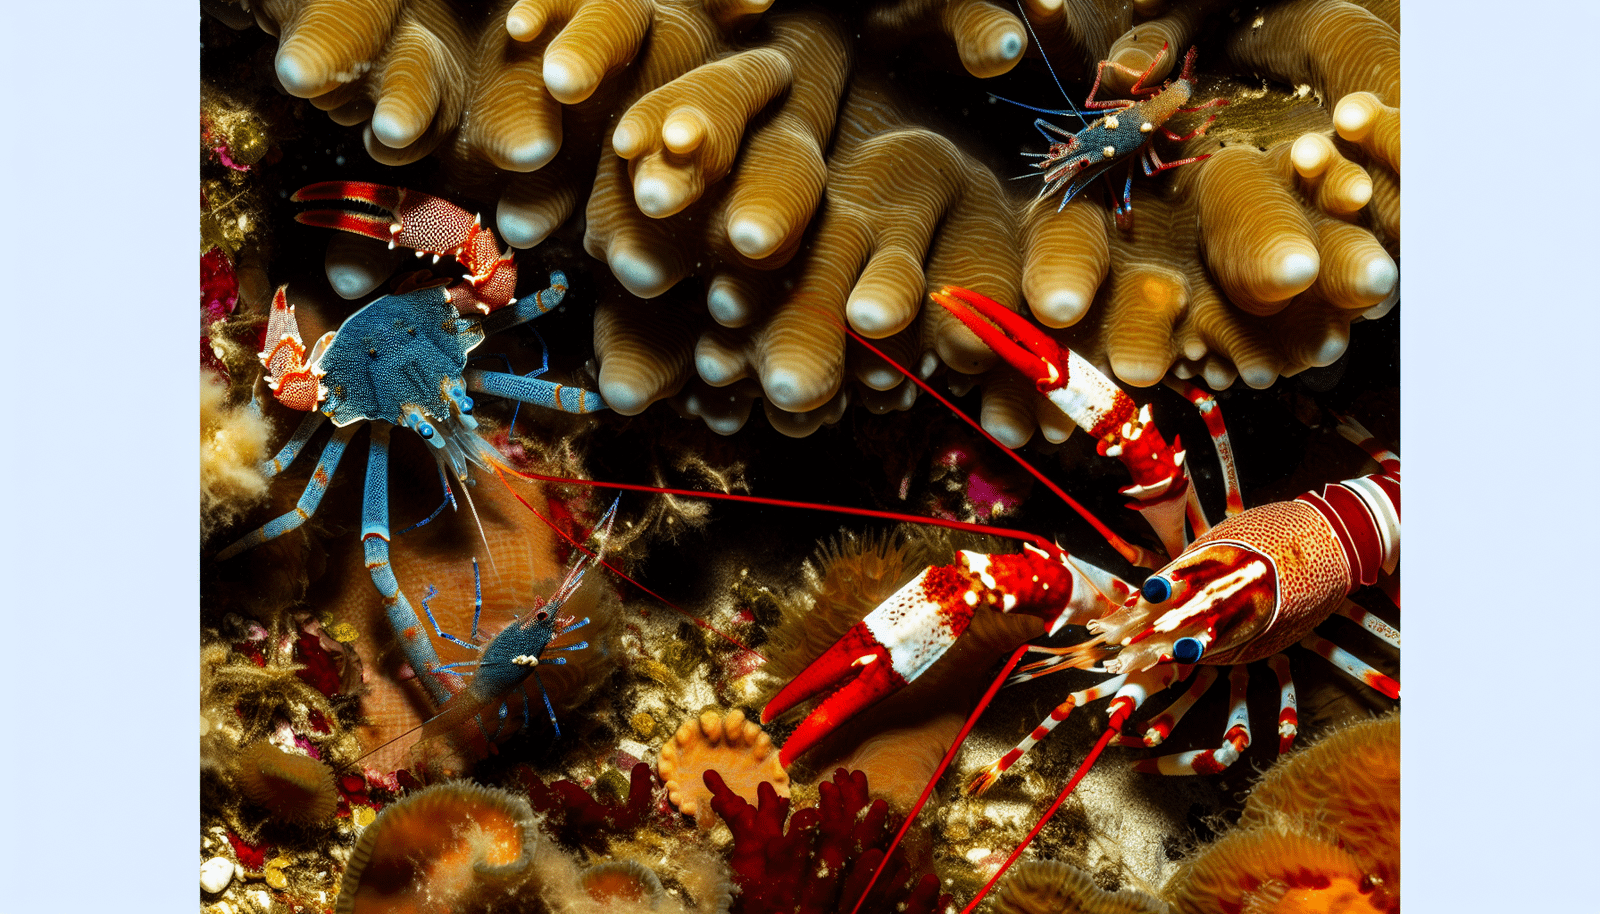 Colorful crustaceans, including crabs and shrimp, scavenging on a coral reef